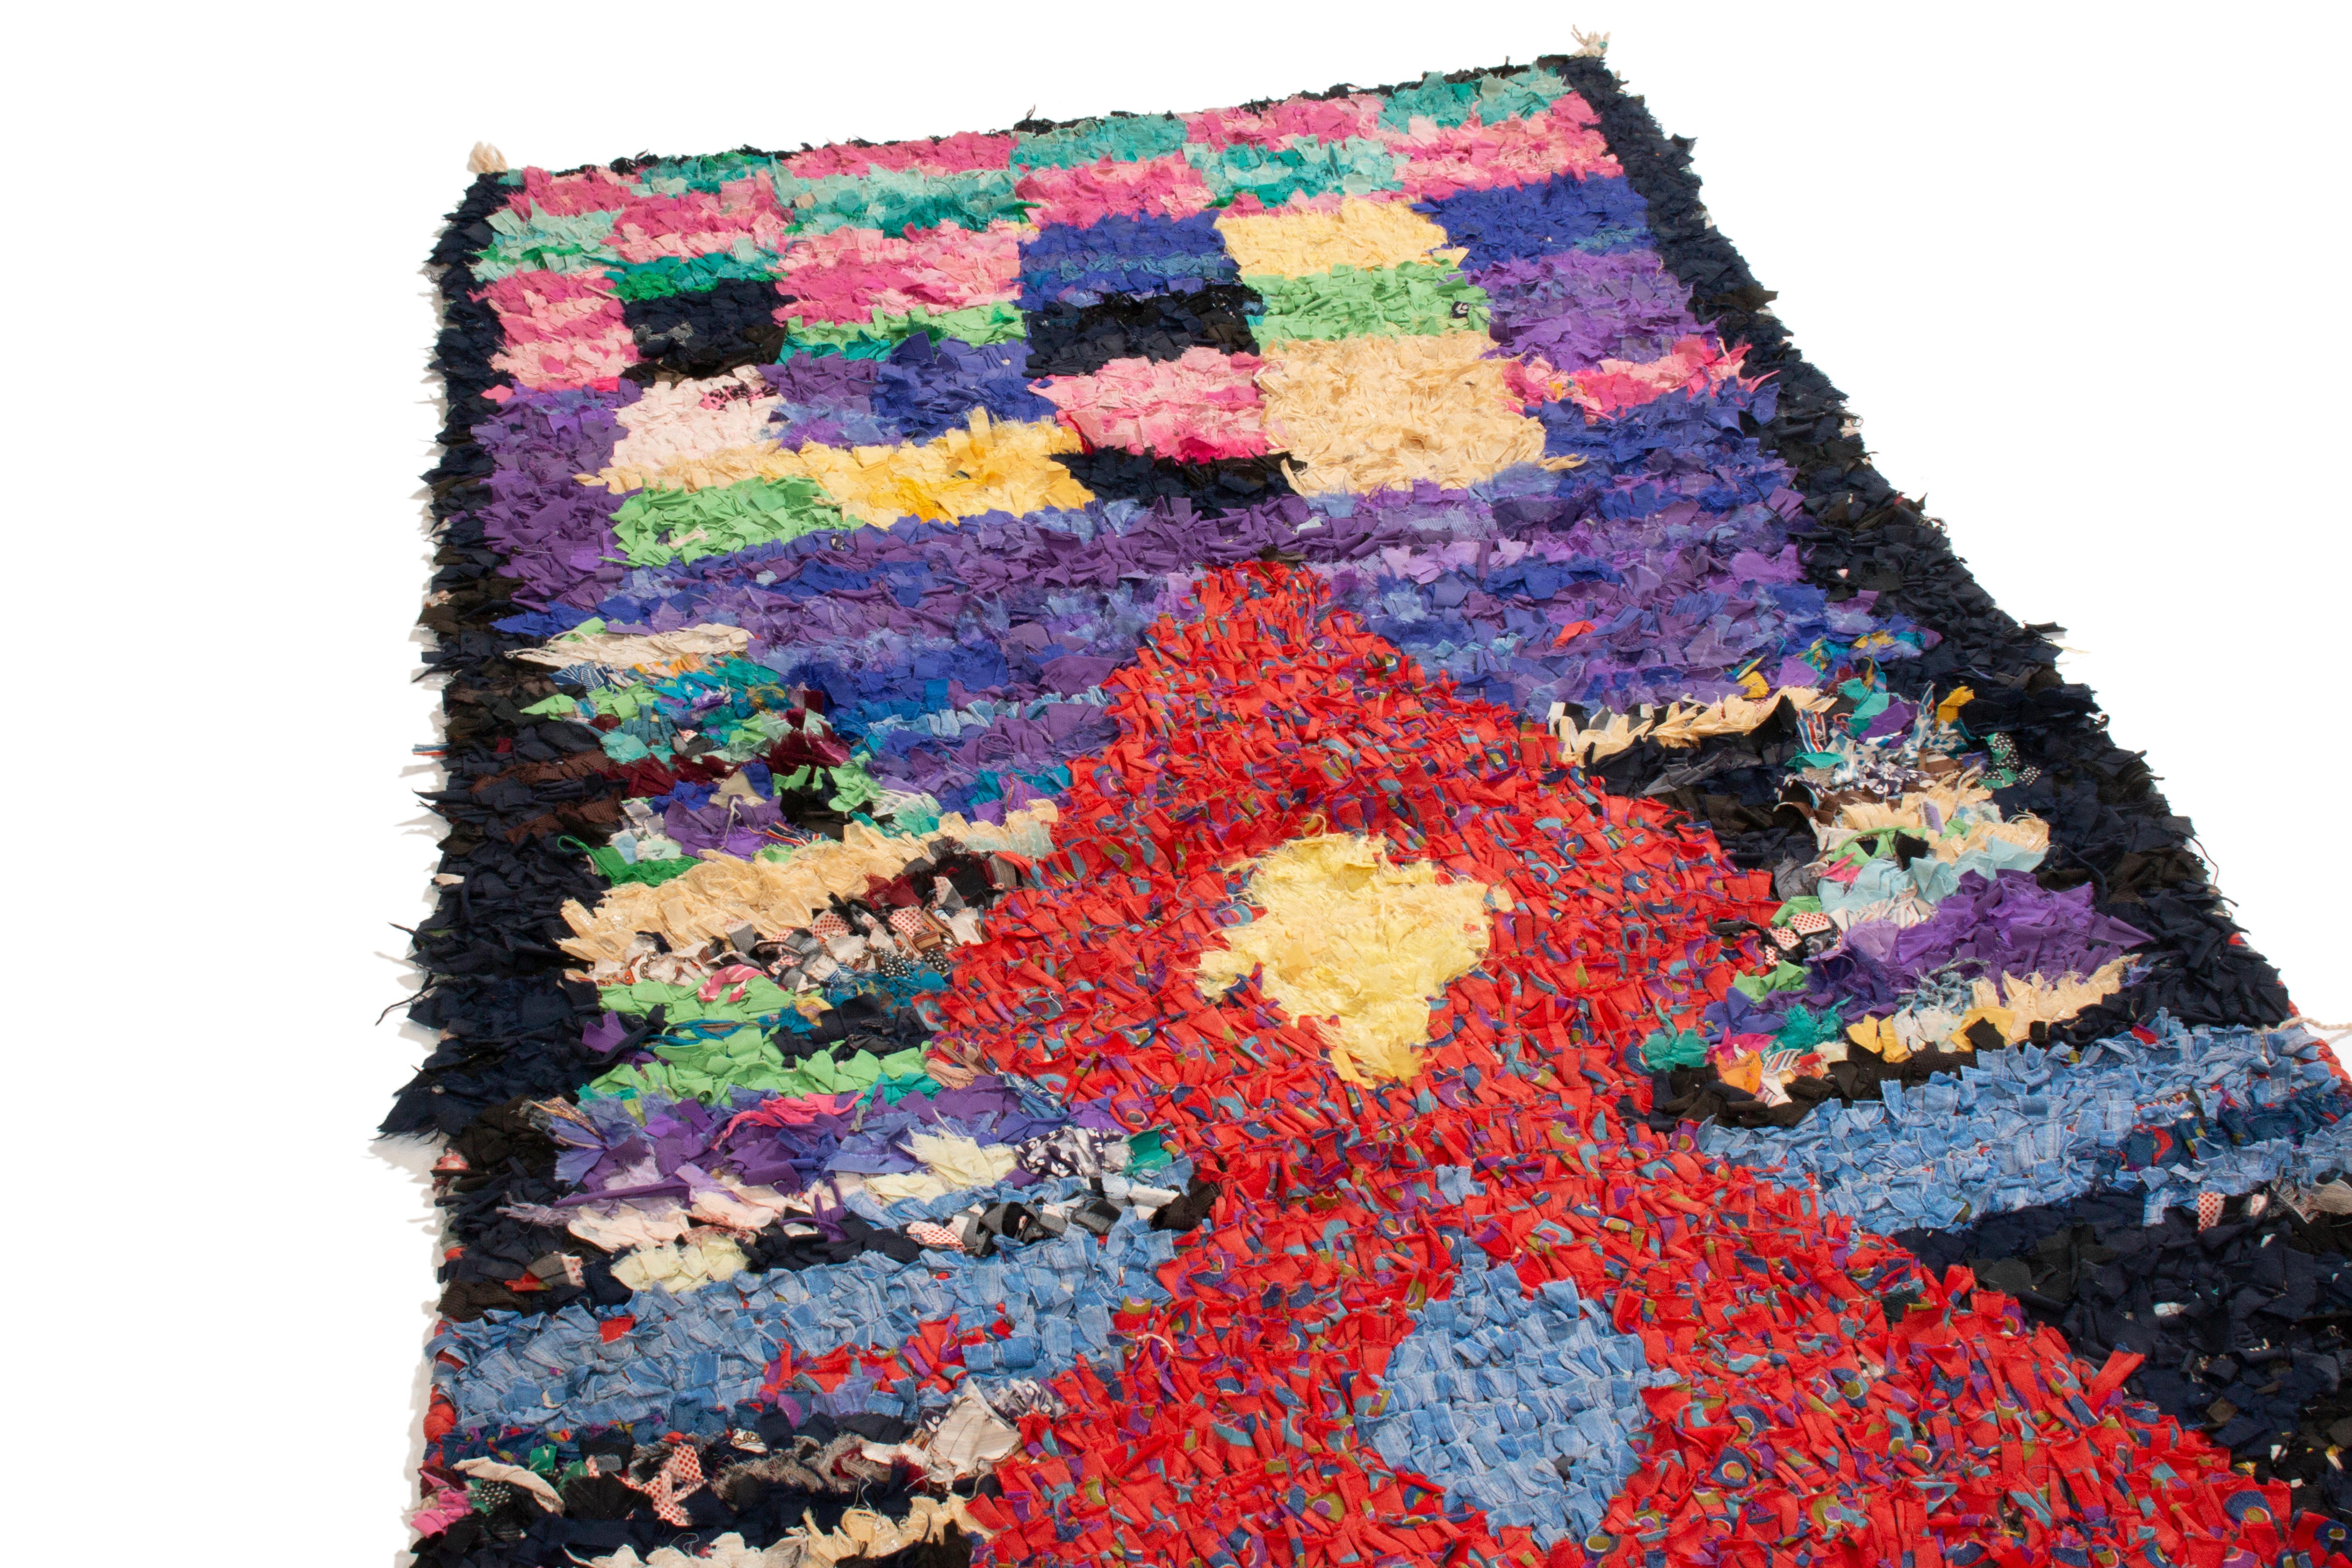 Originating from Morocco in the 1950s, this vintage midcentury Moroccan fabric rug depicts a culturally vital symbol in transitional style. The prominent red geometric emblem with sparks of blue, purple, and green is reminiscent of the Moroccan